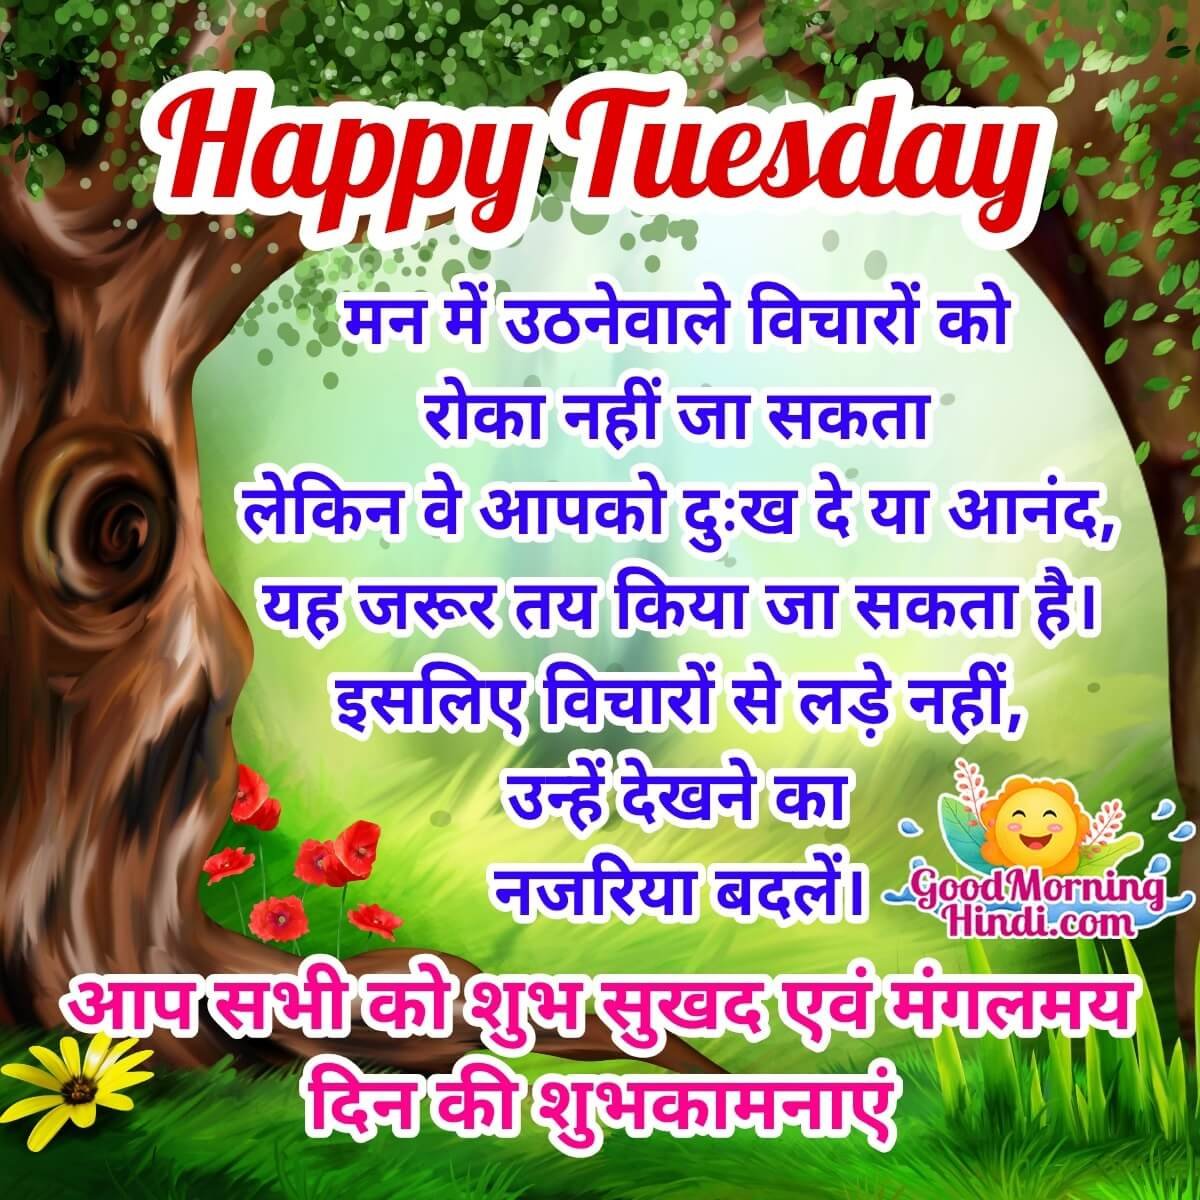 Happy Tuesday Messages In Hindi